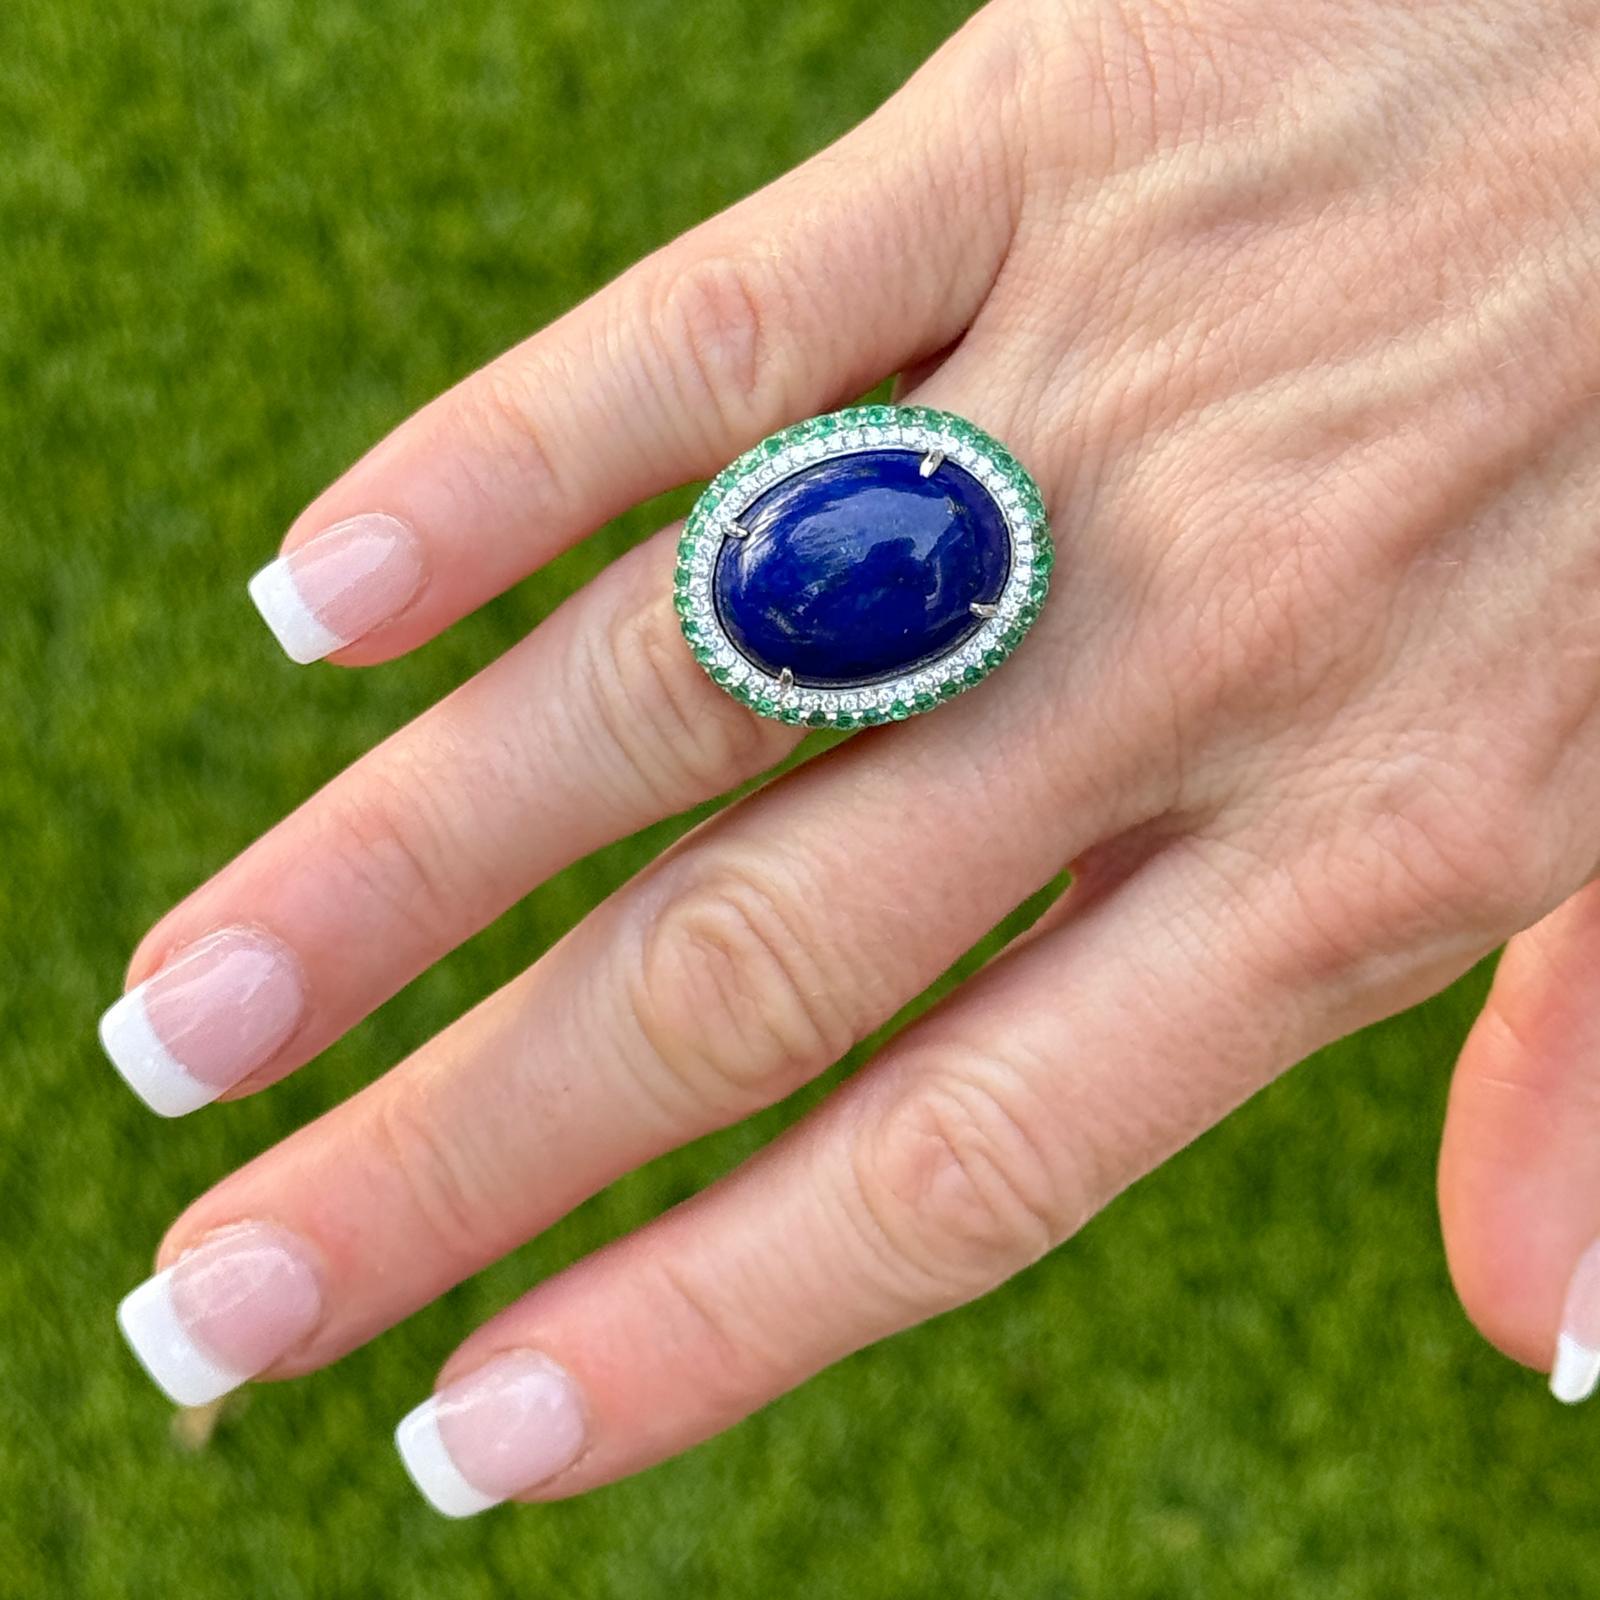 Lapis, emerald, and diamond cocktail ring crafted in 18 karat white gold. The cocktail ring features a cabochon lapis lazuli gemstone, 52 round brilliant cut diamonds, and a row of emeralds. The diamonds weigh approximately .50 CTW and are graded